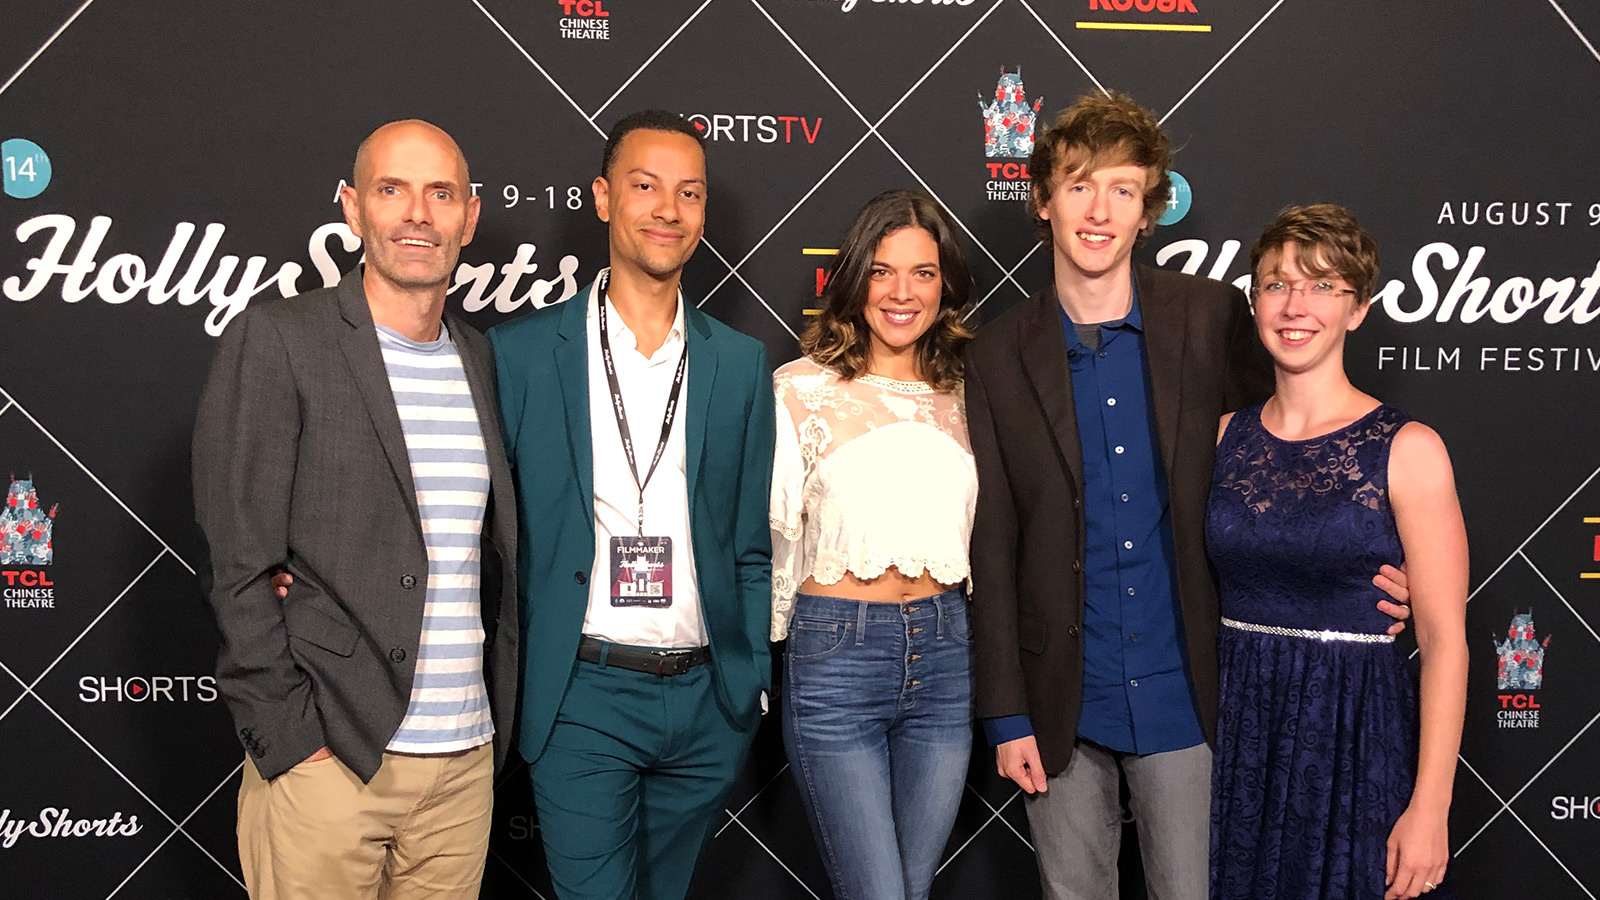 Alex and colleagues at Hollyshorts 2018